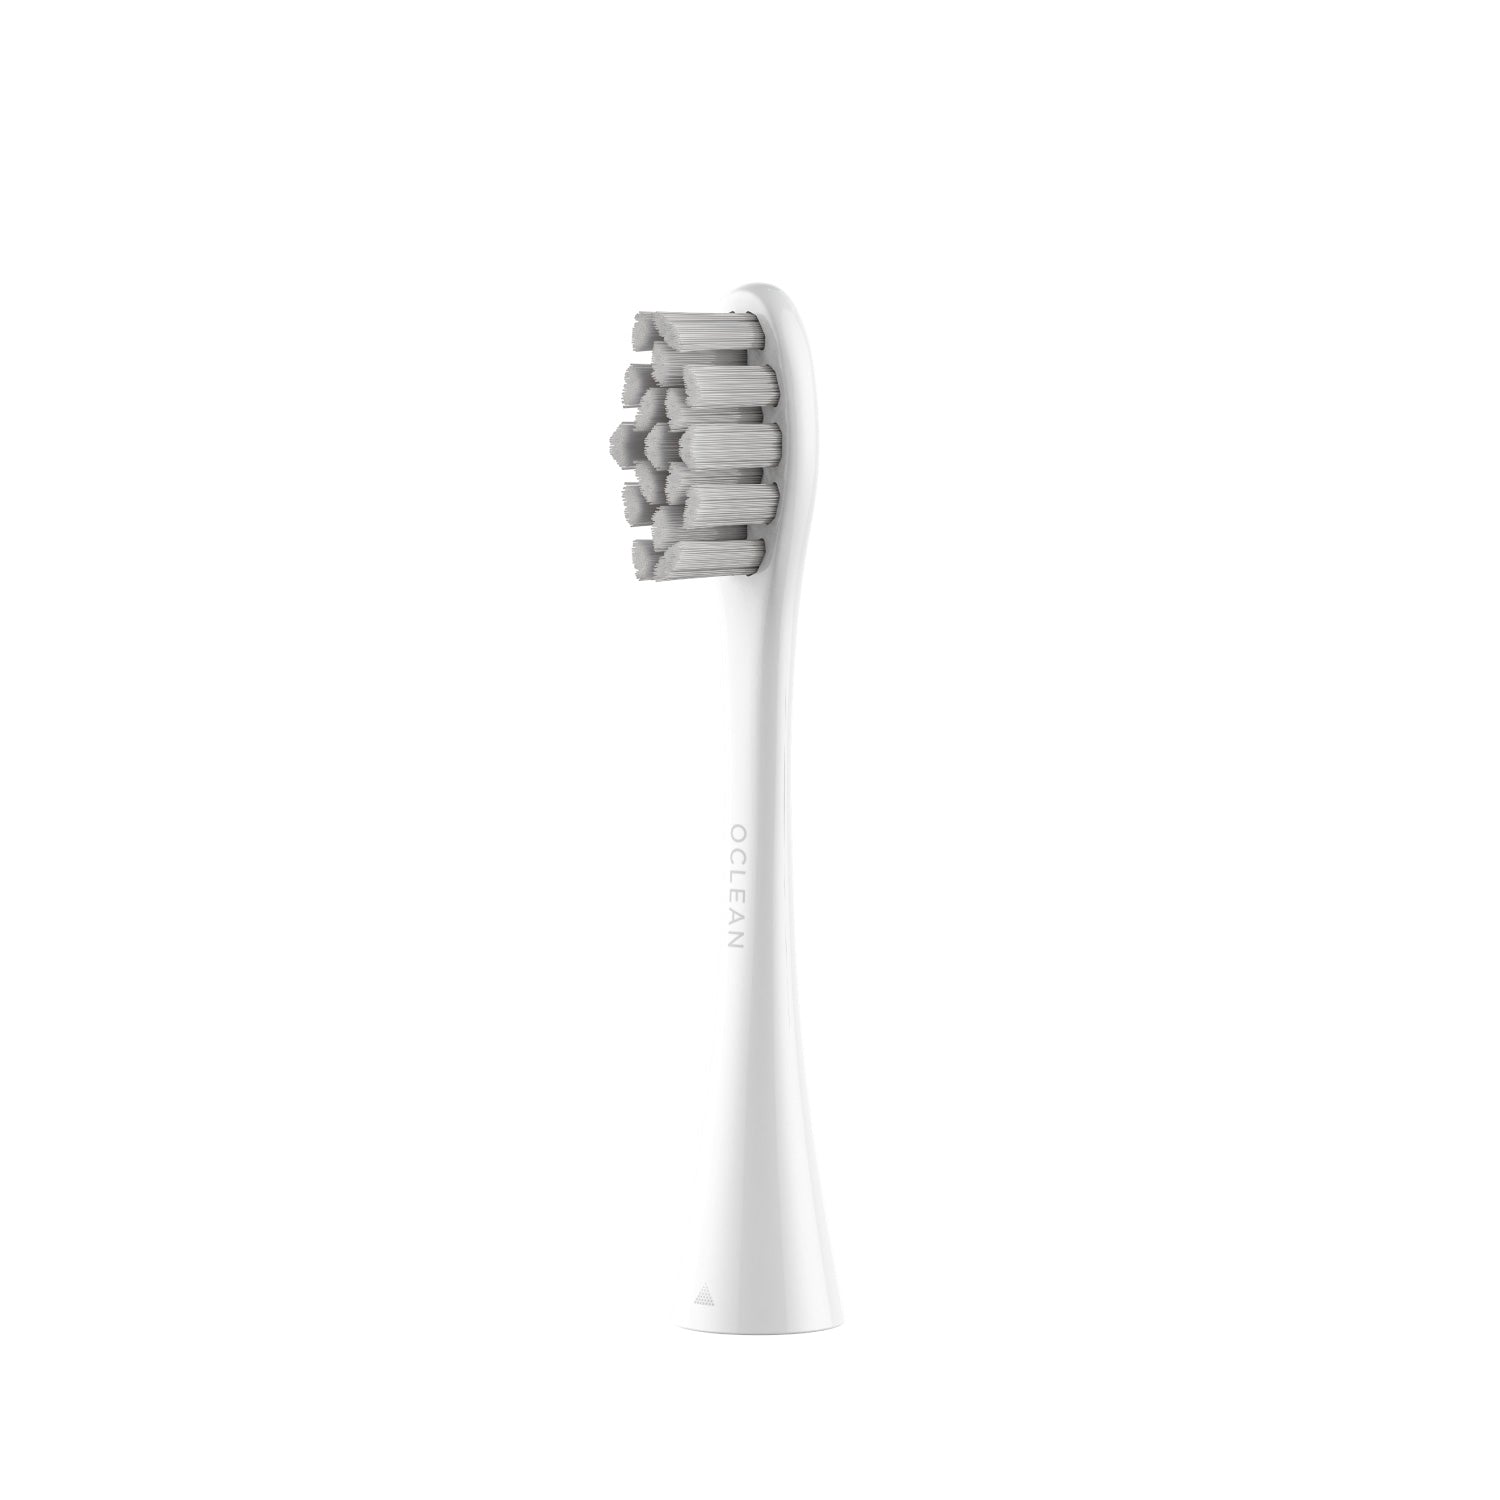 Oclean Brush Heads Refills Toothbrush Replacement Heads Daily Clean P2S6 Oclean Official